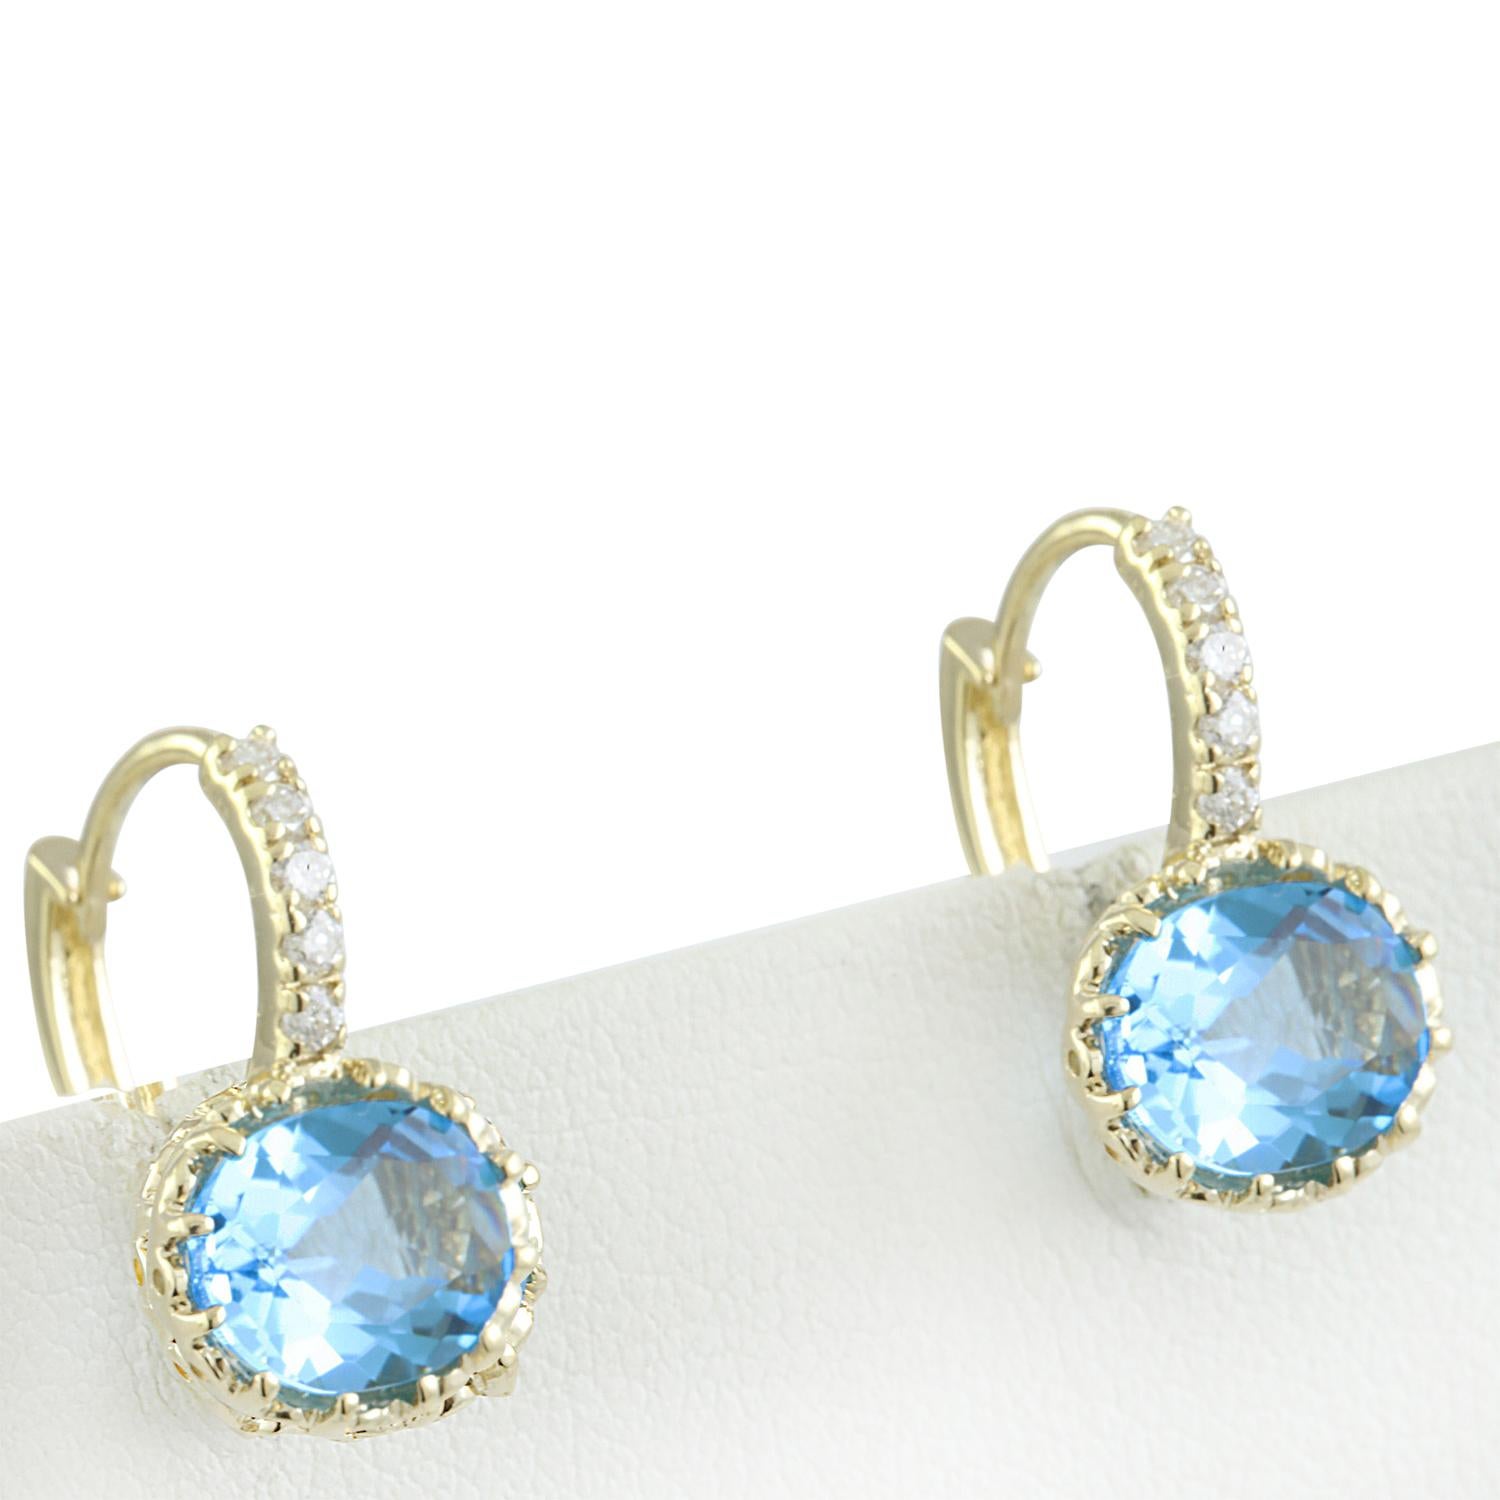 Introducing our elegant 14 Karat Solid Yellow Gold Diamond Earrings adorned with a stunning 4.40 Carat Natural Topaz, stamped for authenticity. Crafted with precision and style, these earrings are a true symbol of sophistication. Weighing 3.8 grams